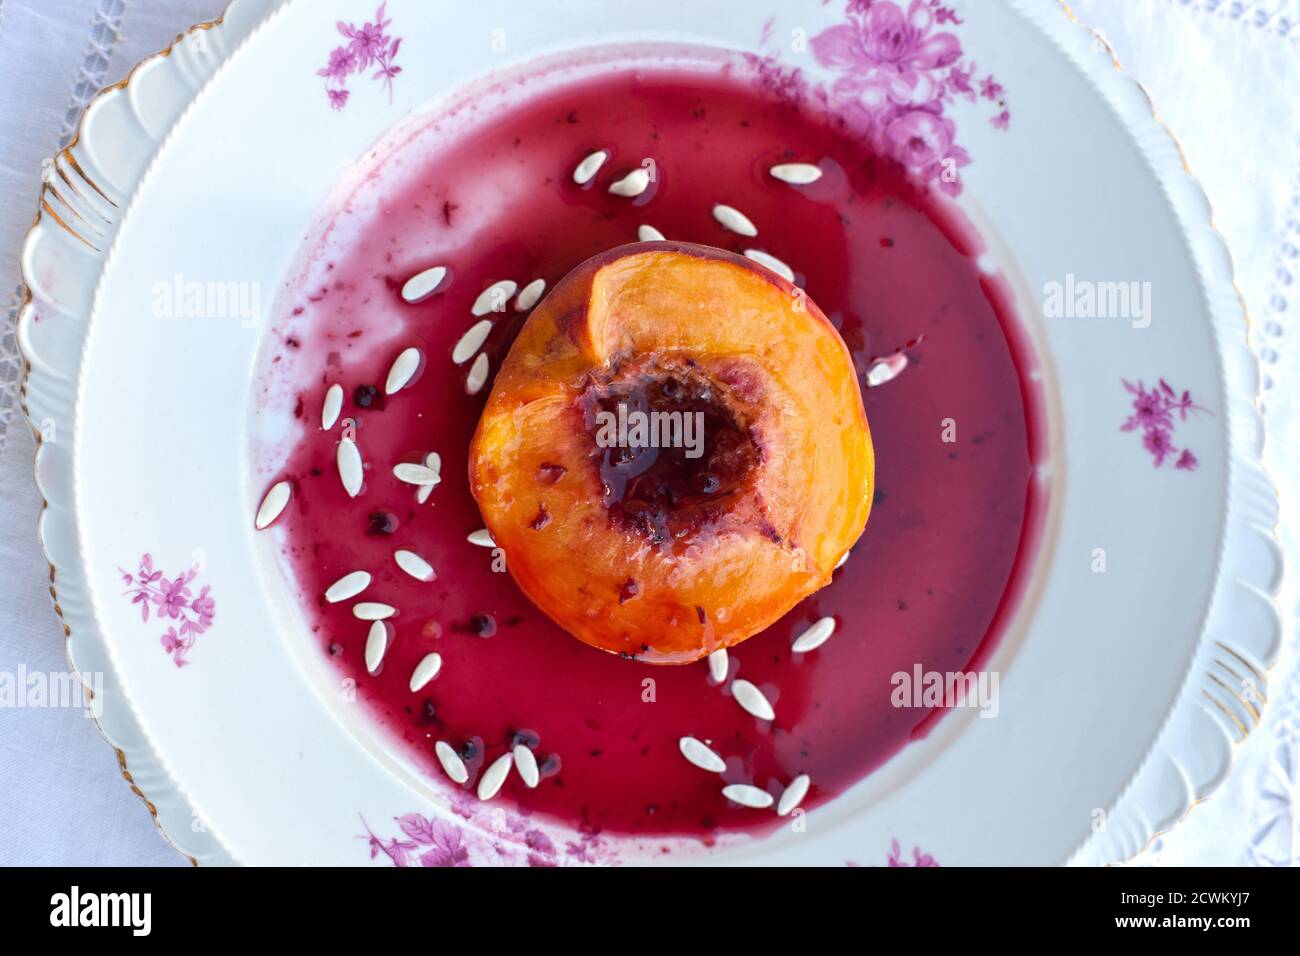 Note Delicious Dessert, Peaches in Syrup Stock Photo